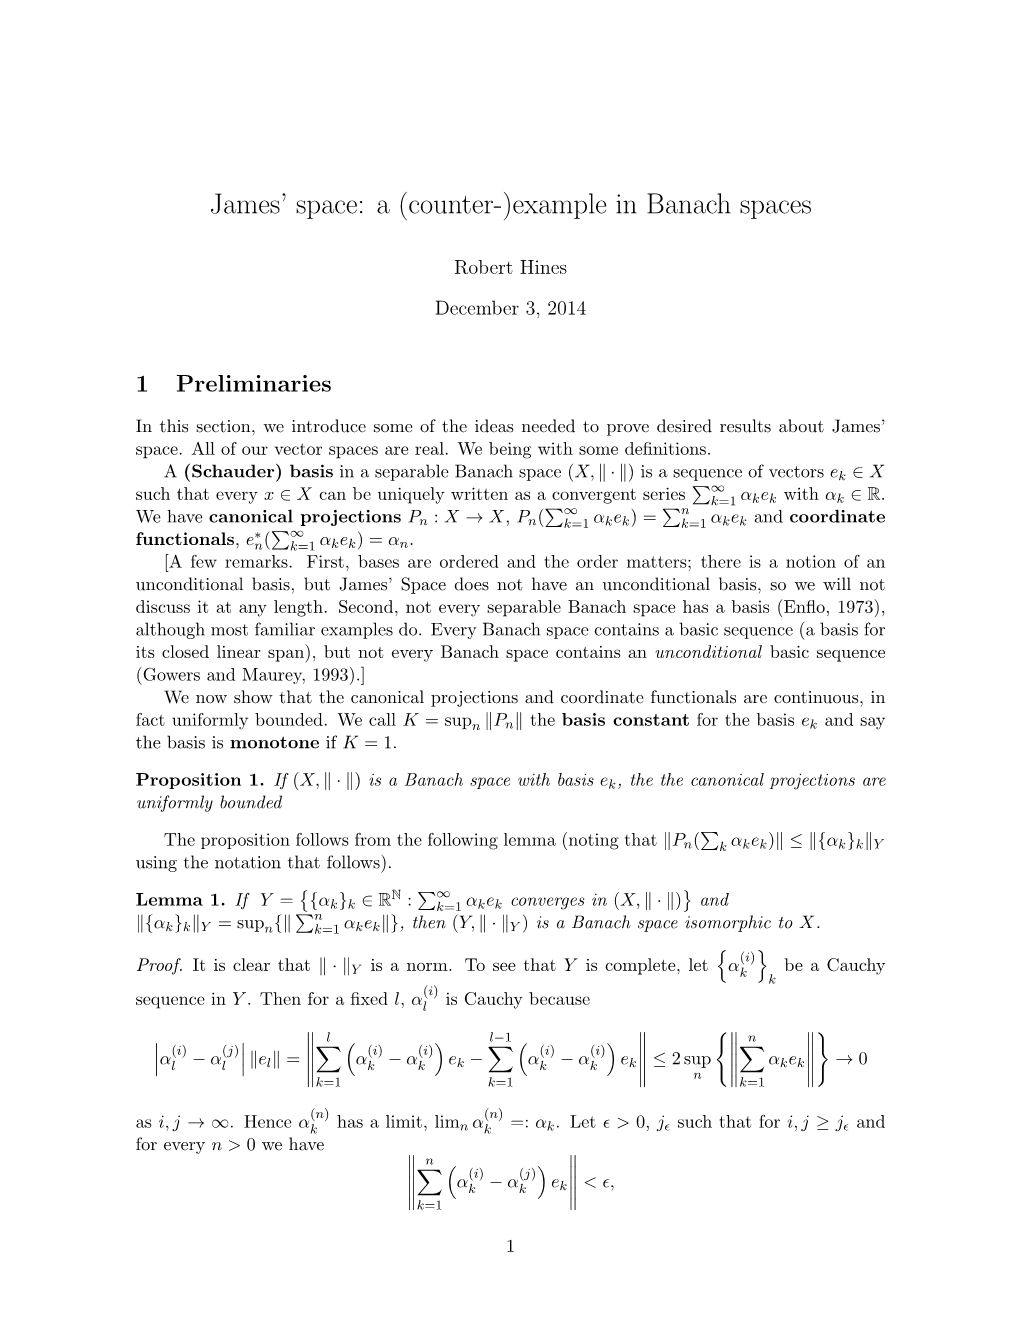 James' Space: a (Counter-)Example in Banach Spaces